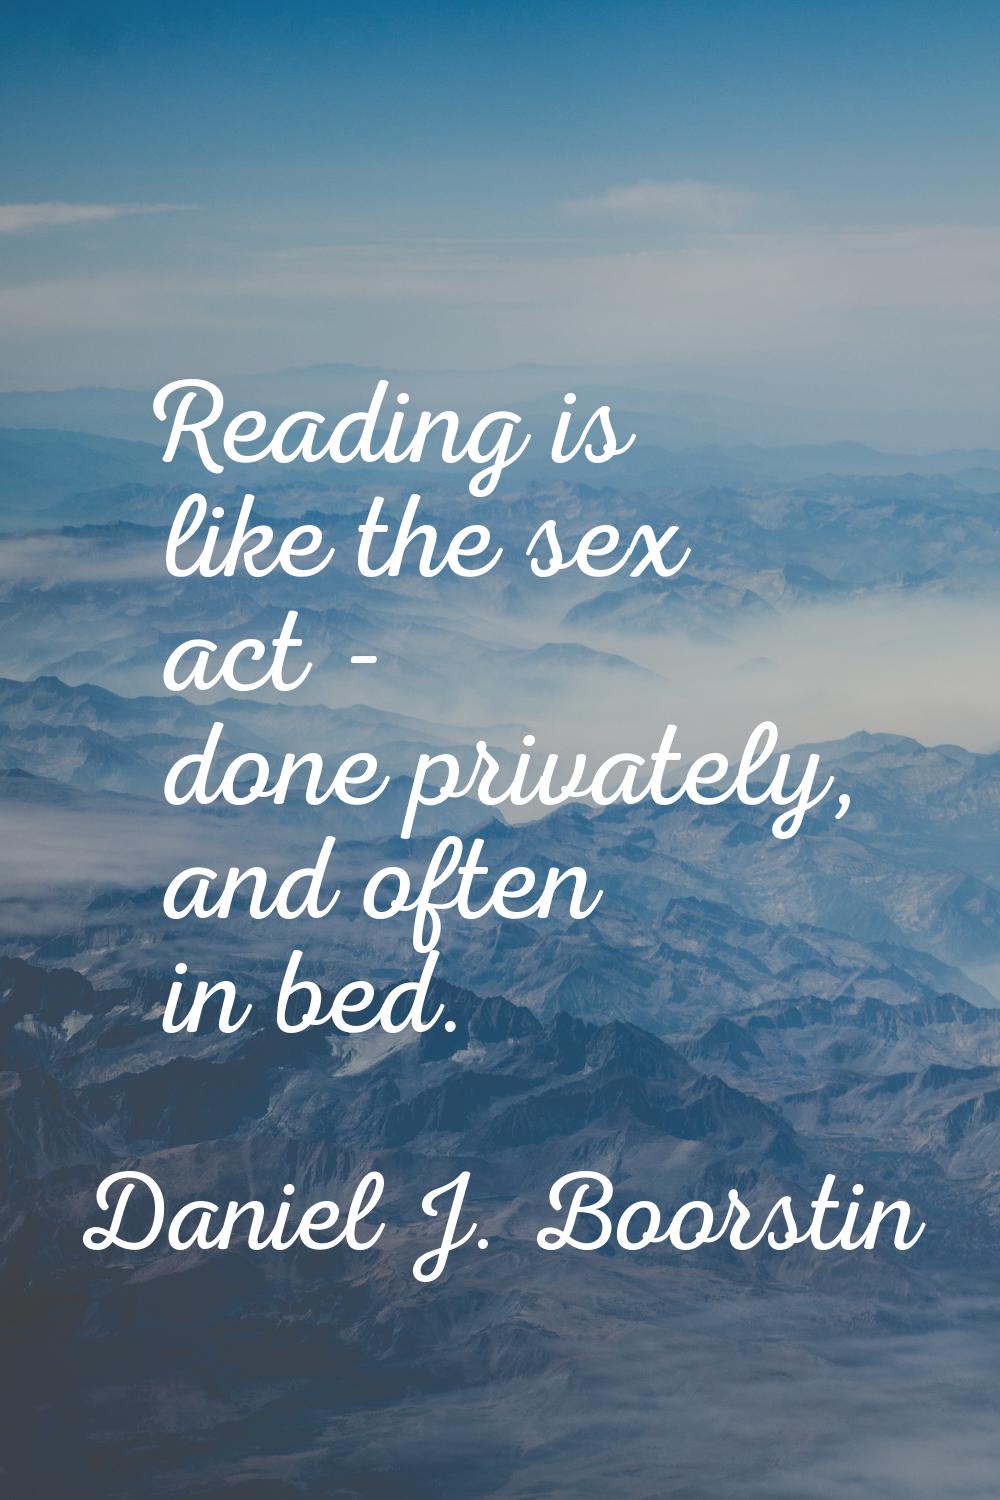 Reading is like the sex act - done privately, and often in bed.